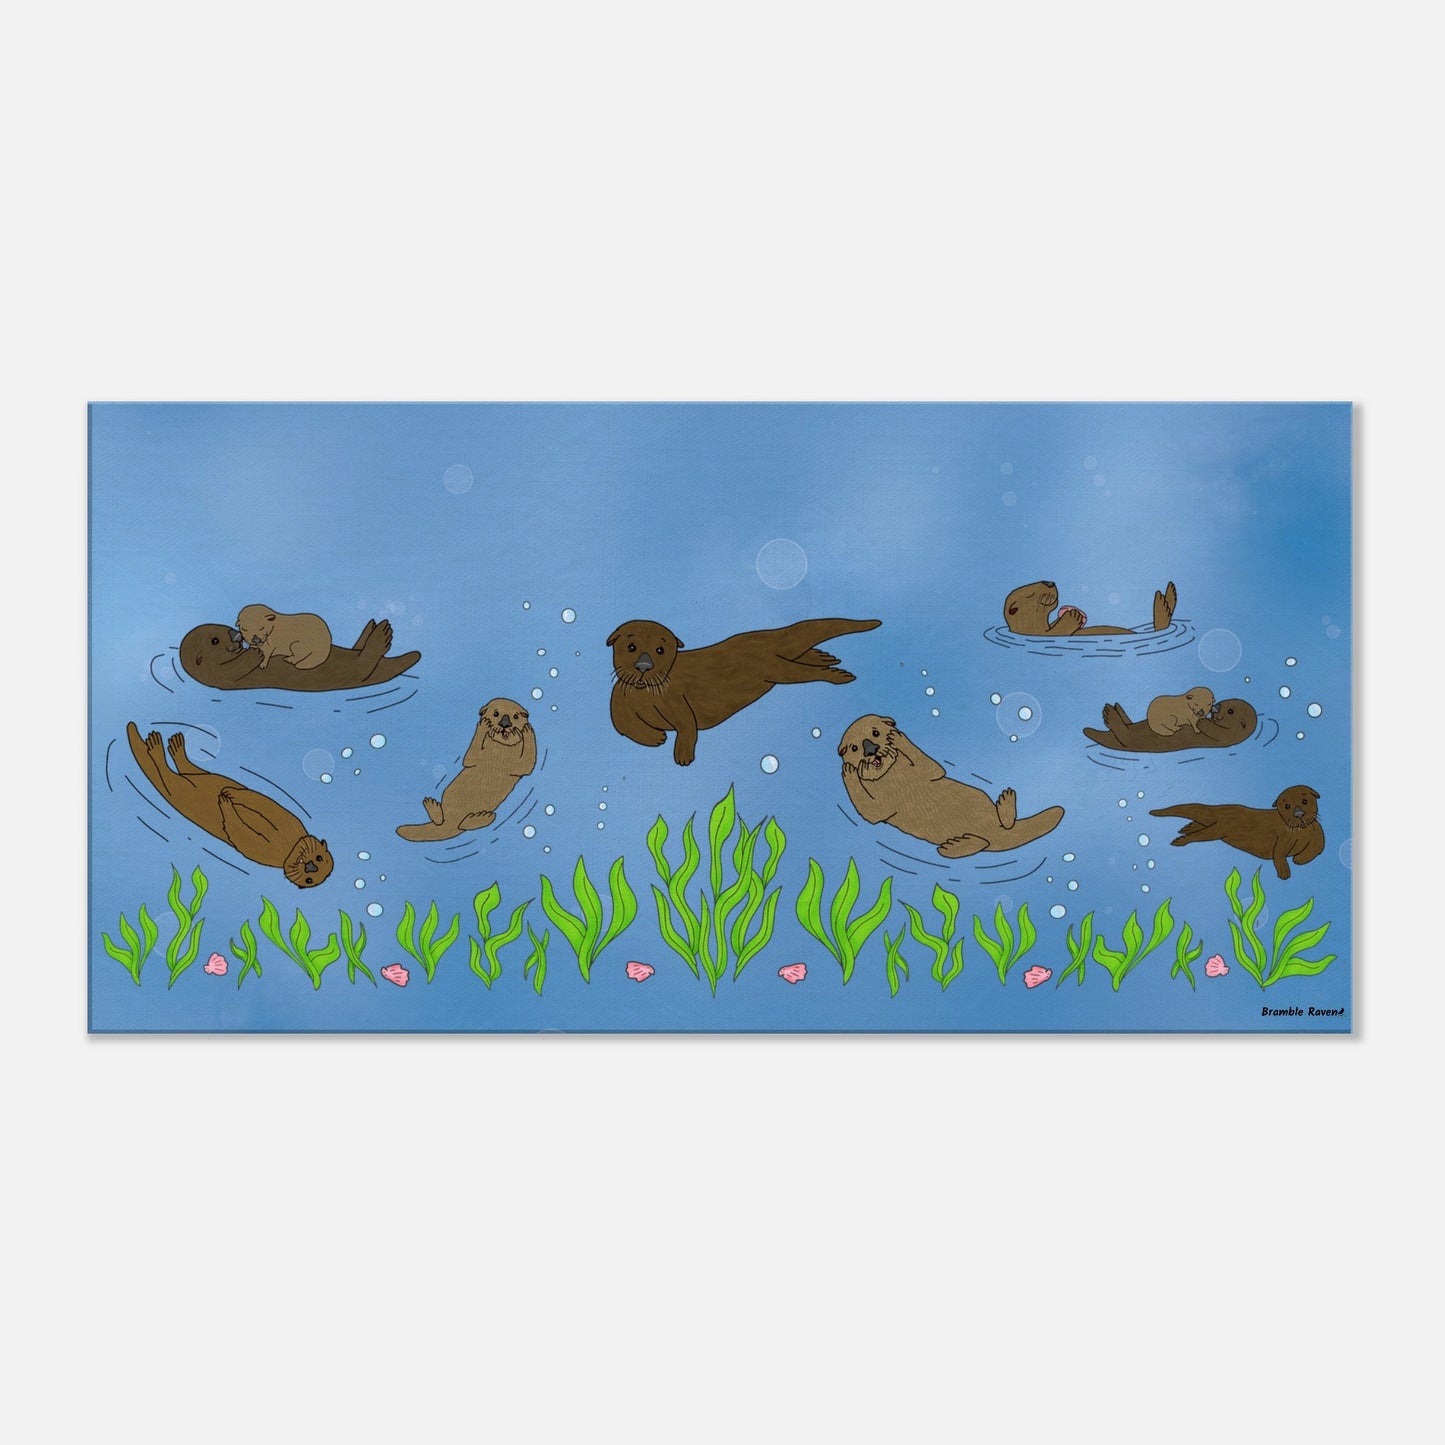 20 by 40 inch slim canvas wall art print of sea otters swimming along the seabed. Hanging hardware included for easy installation.